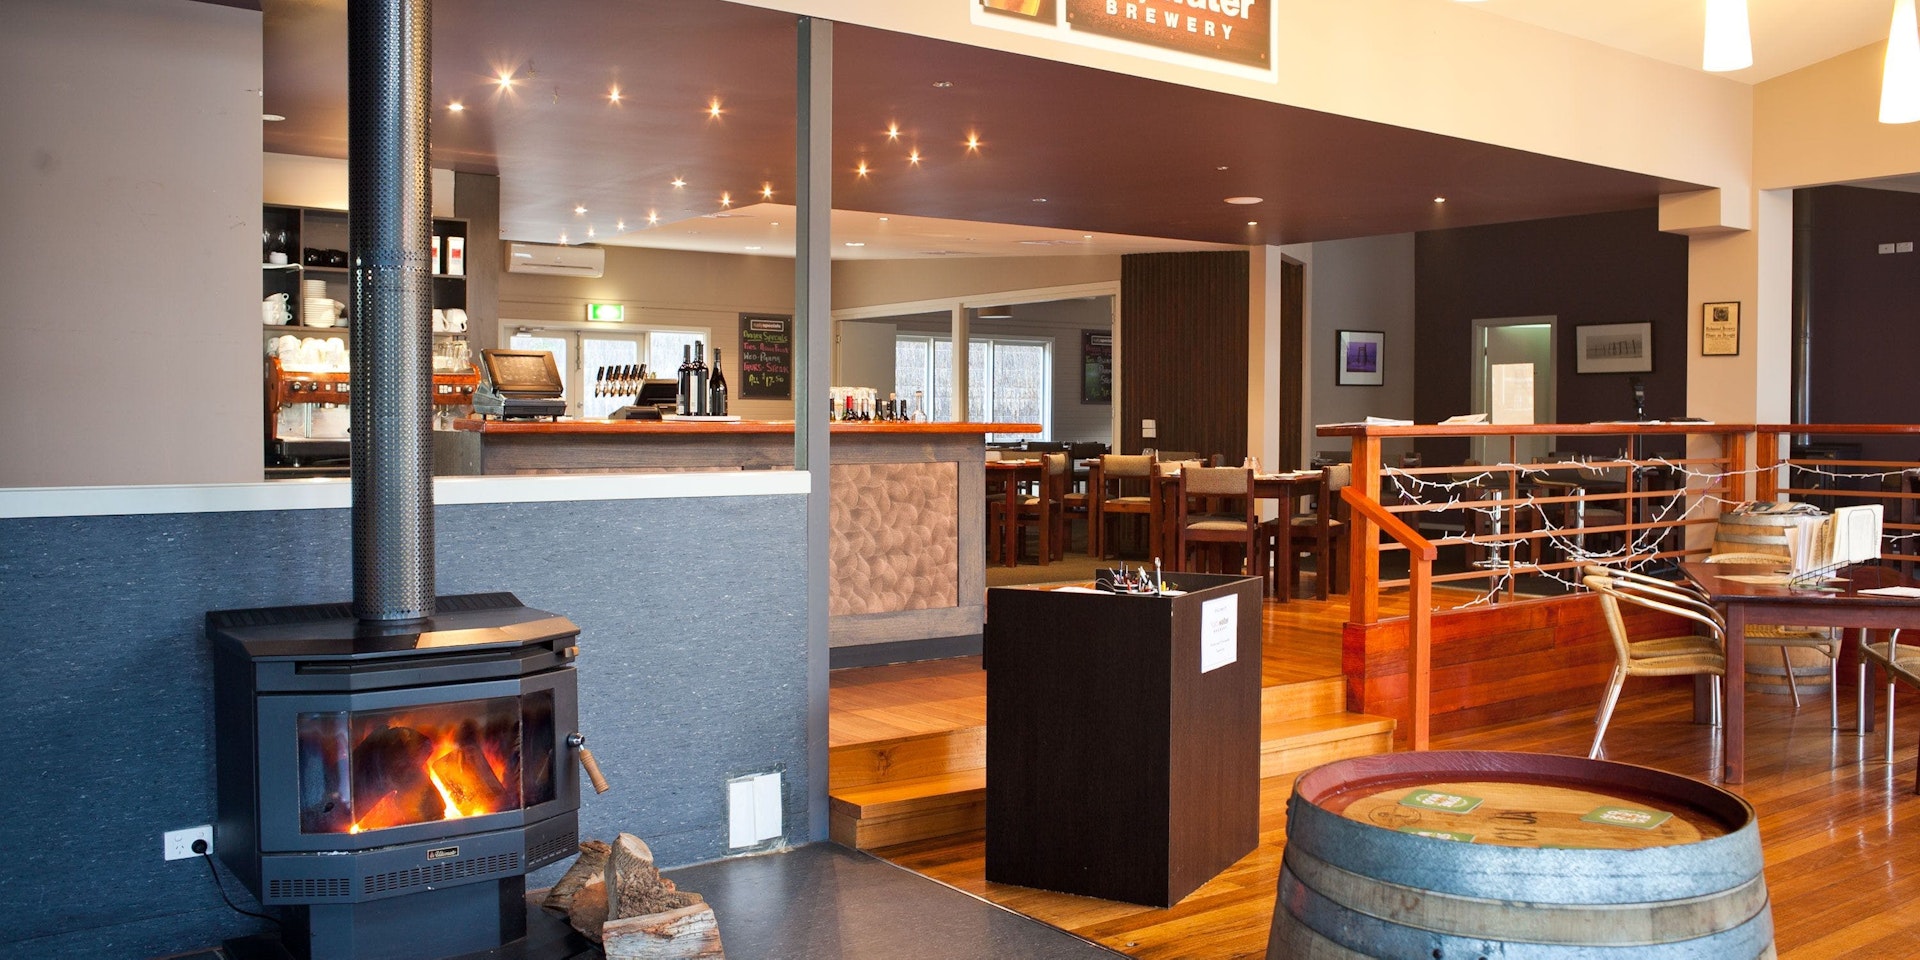 phillip island brewery tours